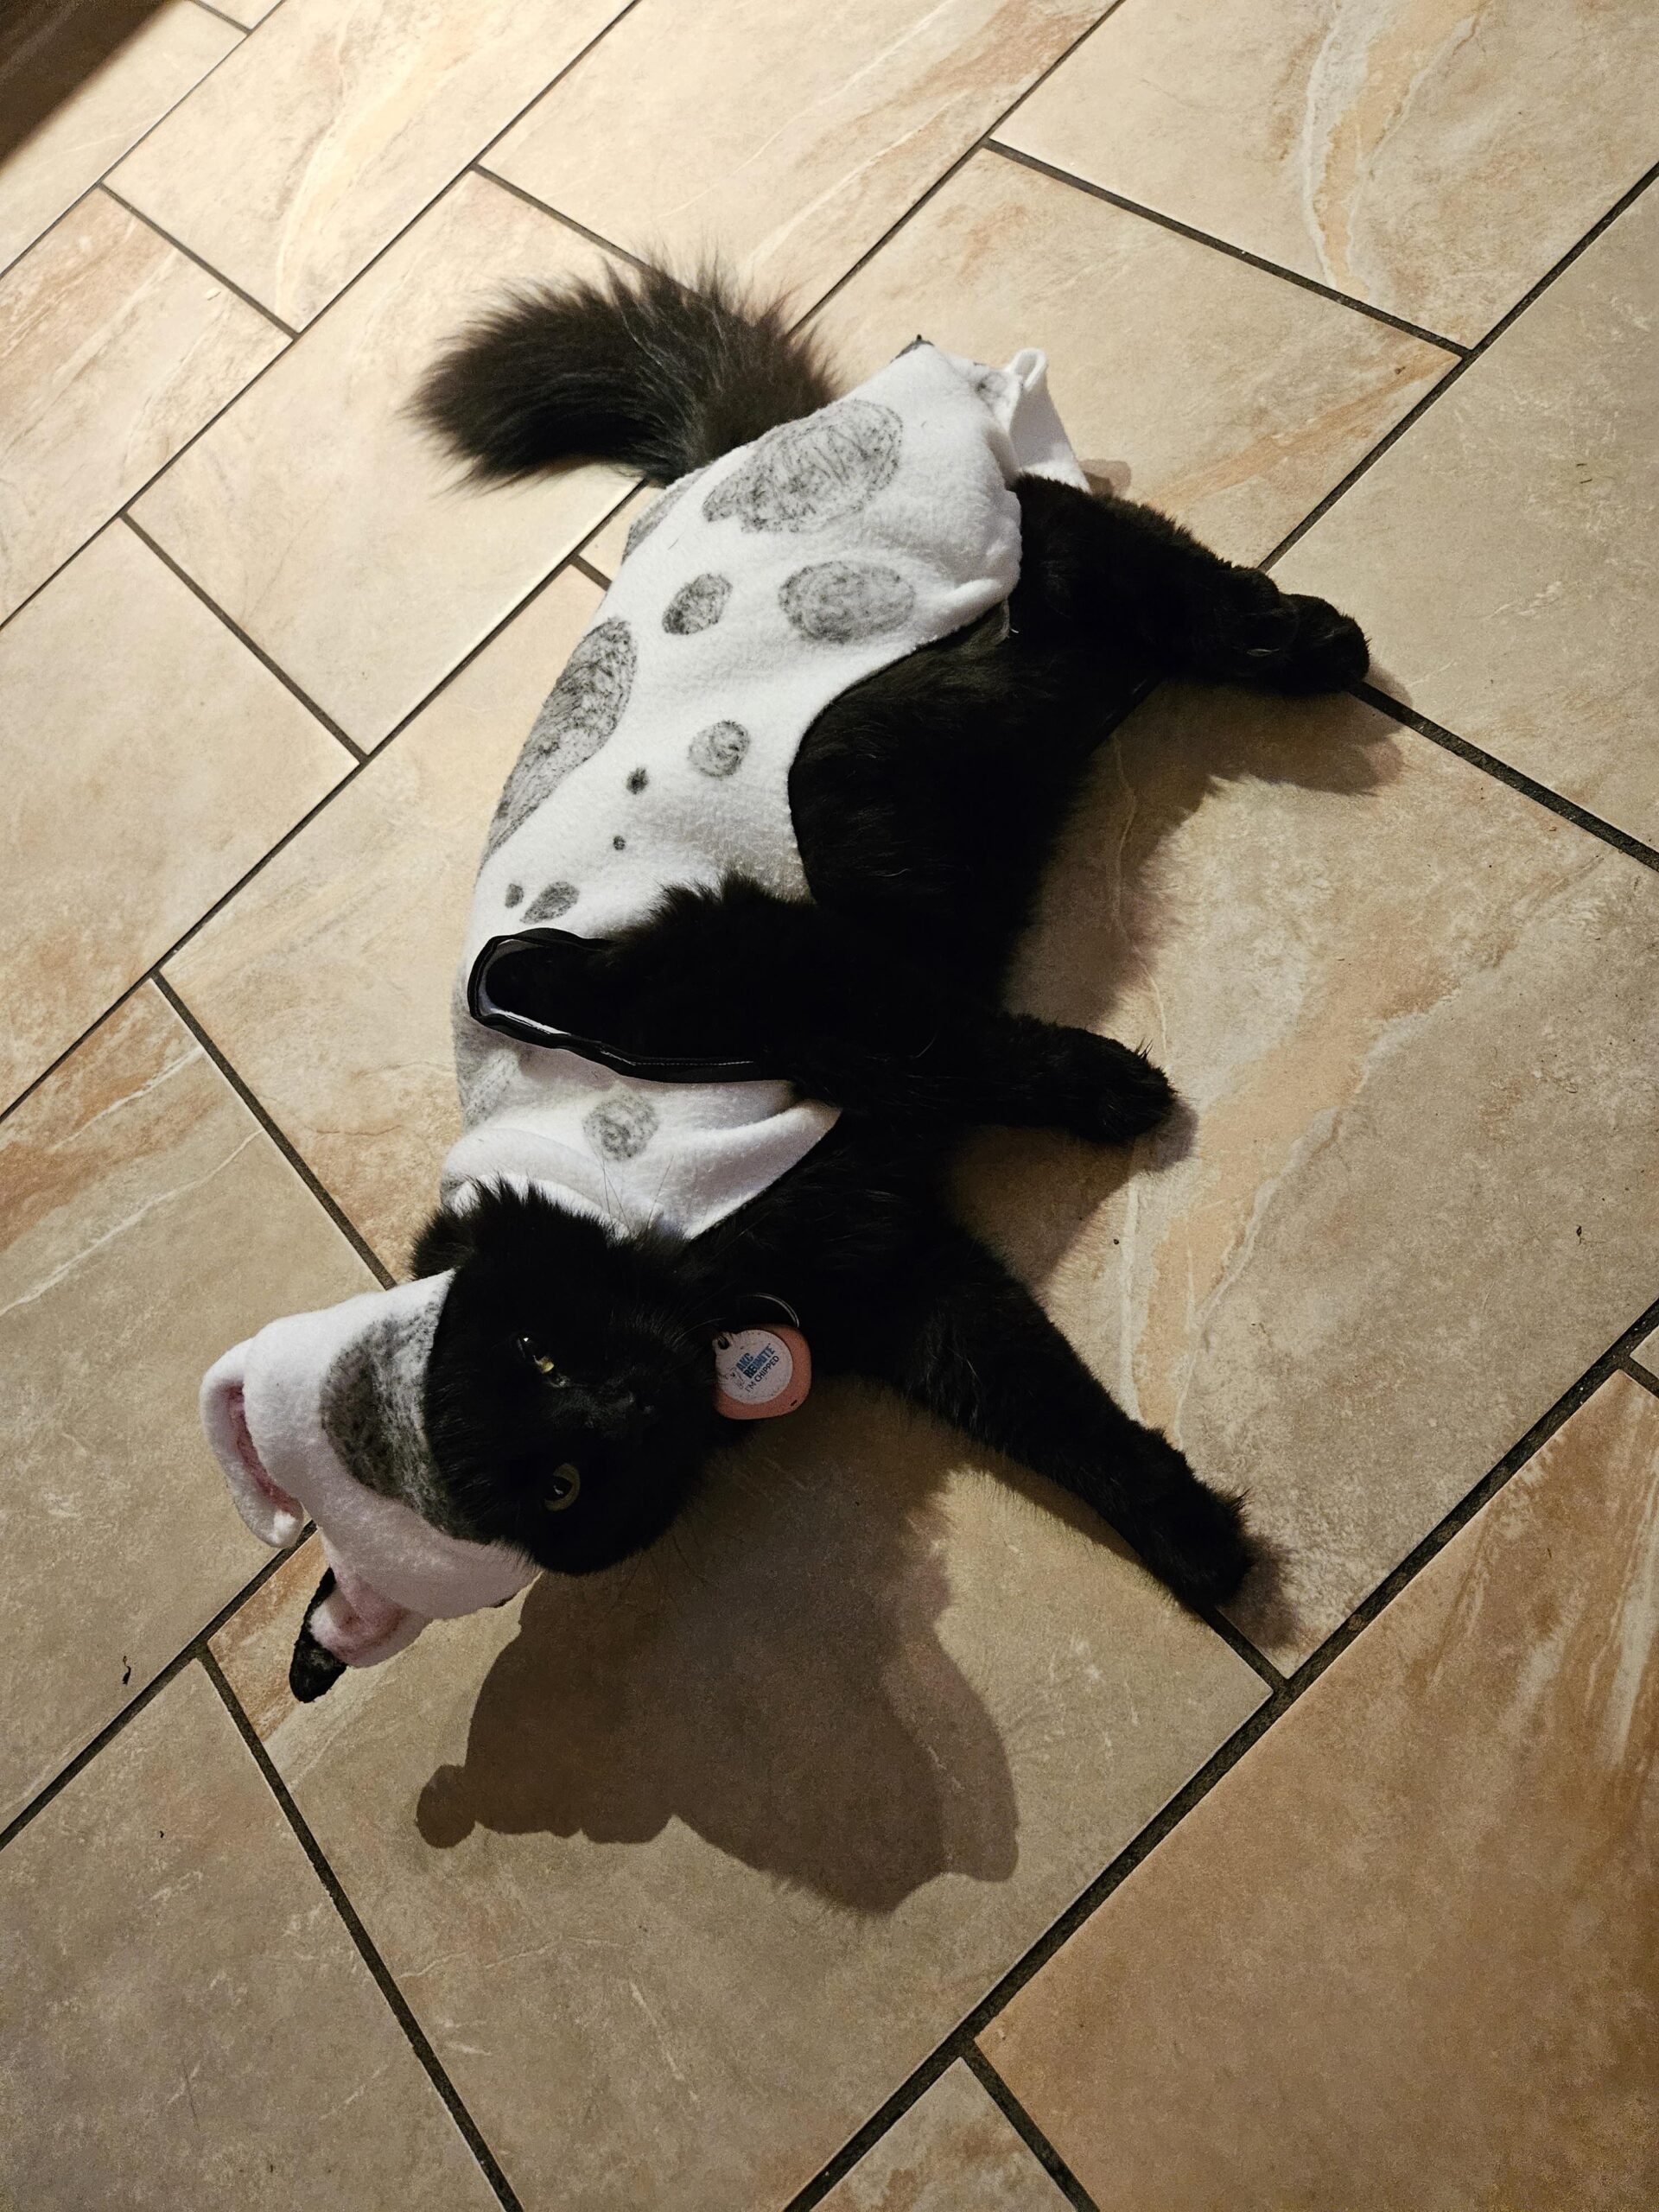 Kitty ready for the “dog costume contest”